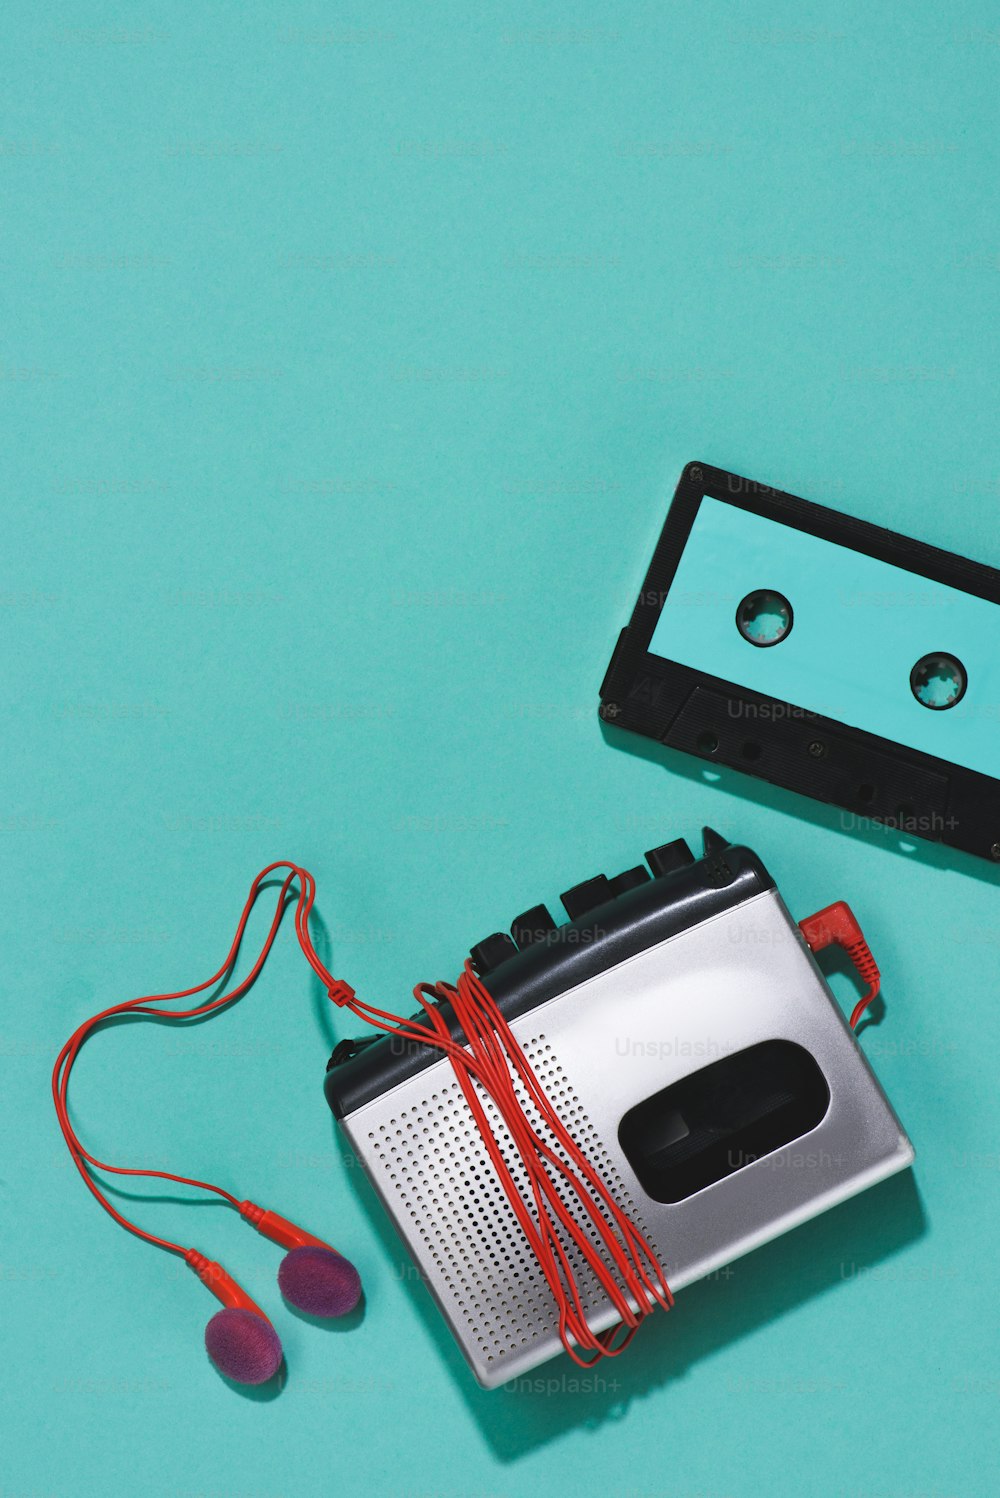 flat lay with retro audio cassette, cassette player and earphones isolated on blue